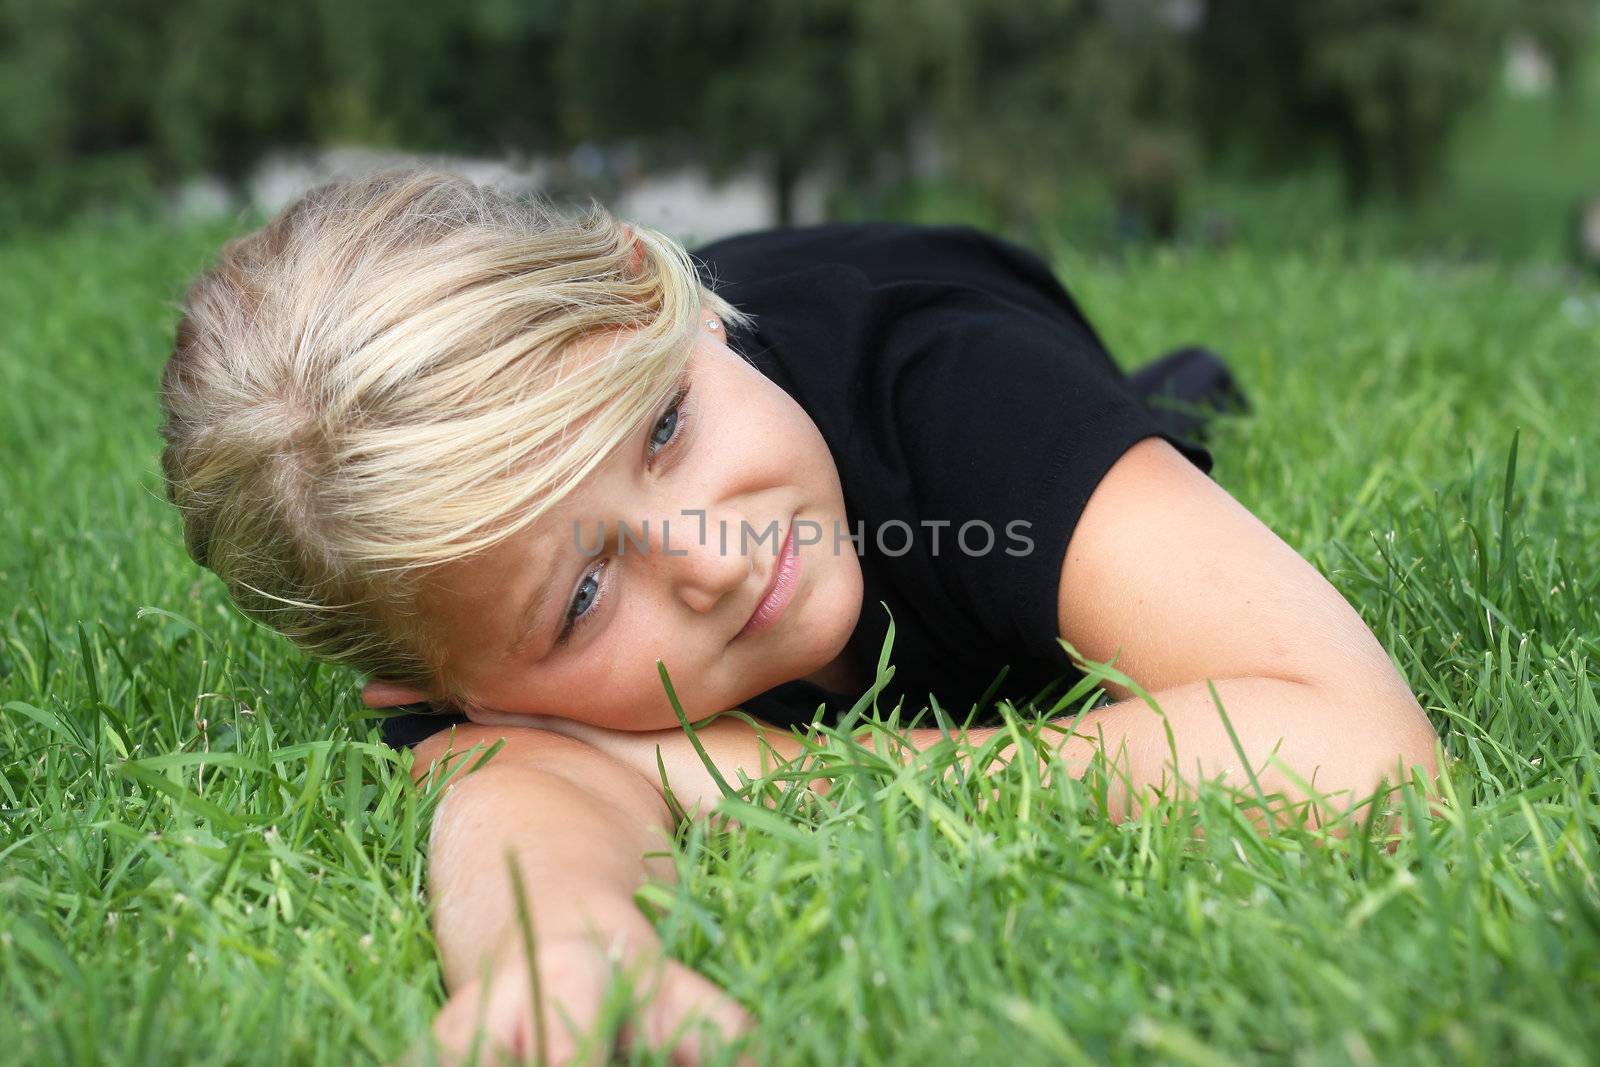 A young girl relaxing on green grass